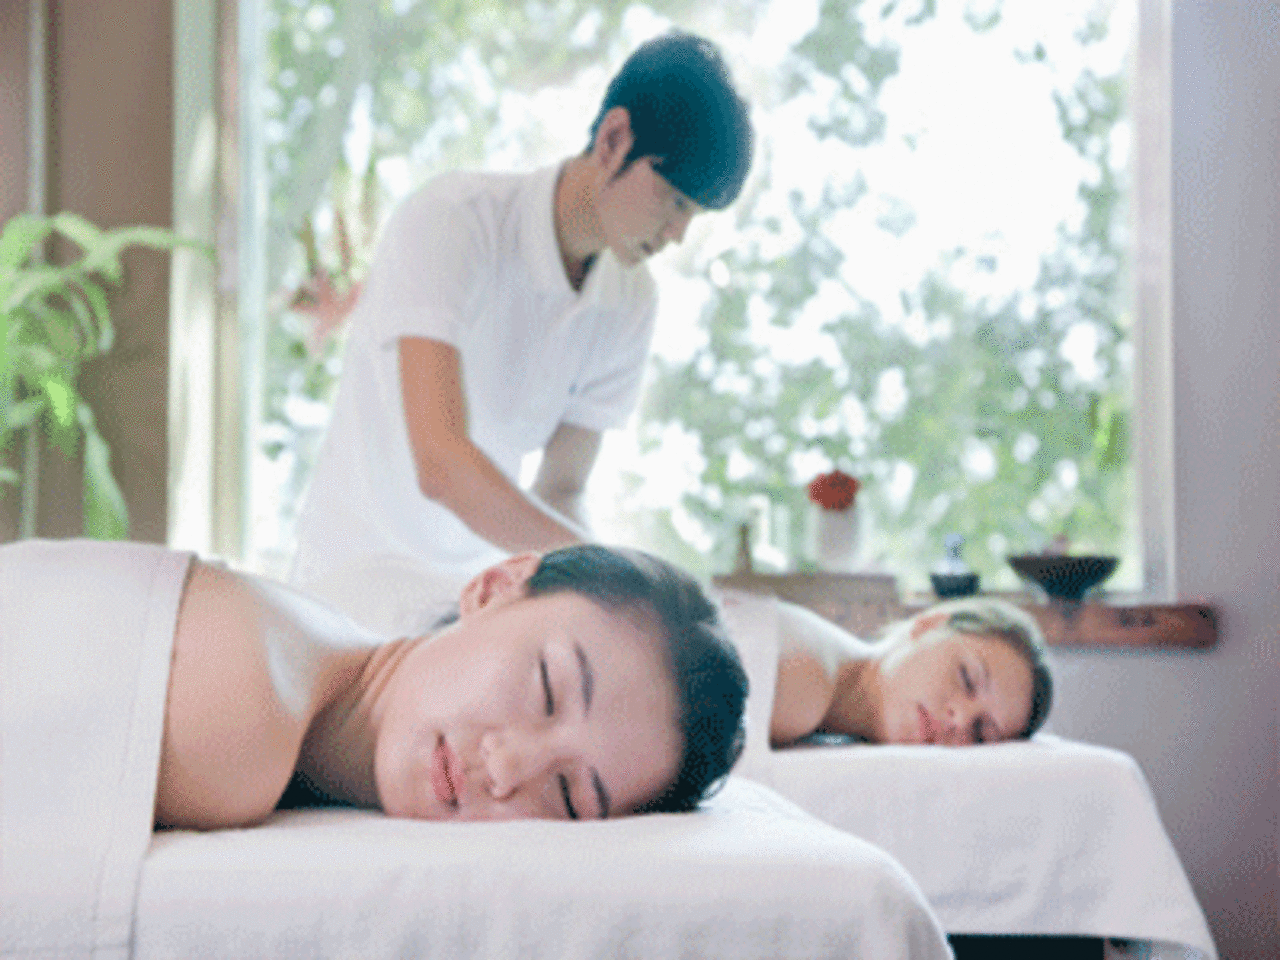 Quickies and cross gender spa massages find takers in the city